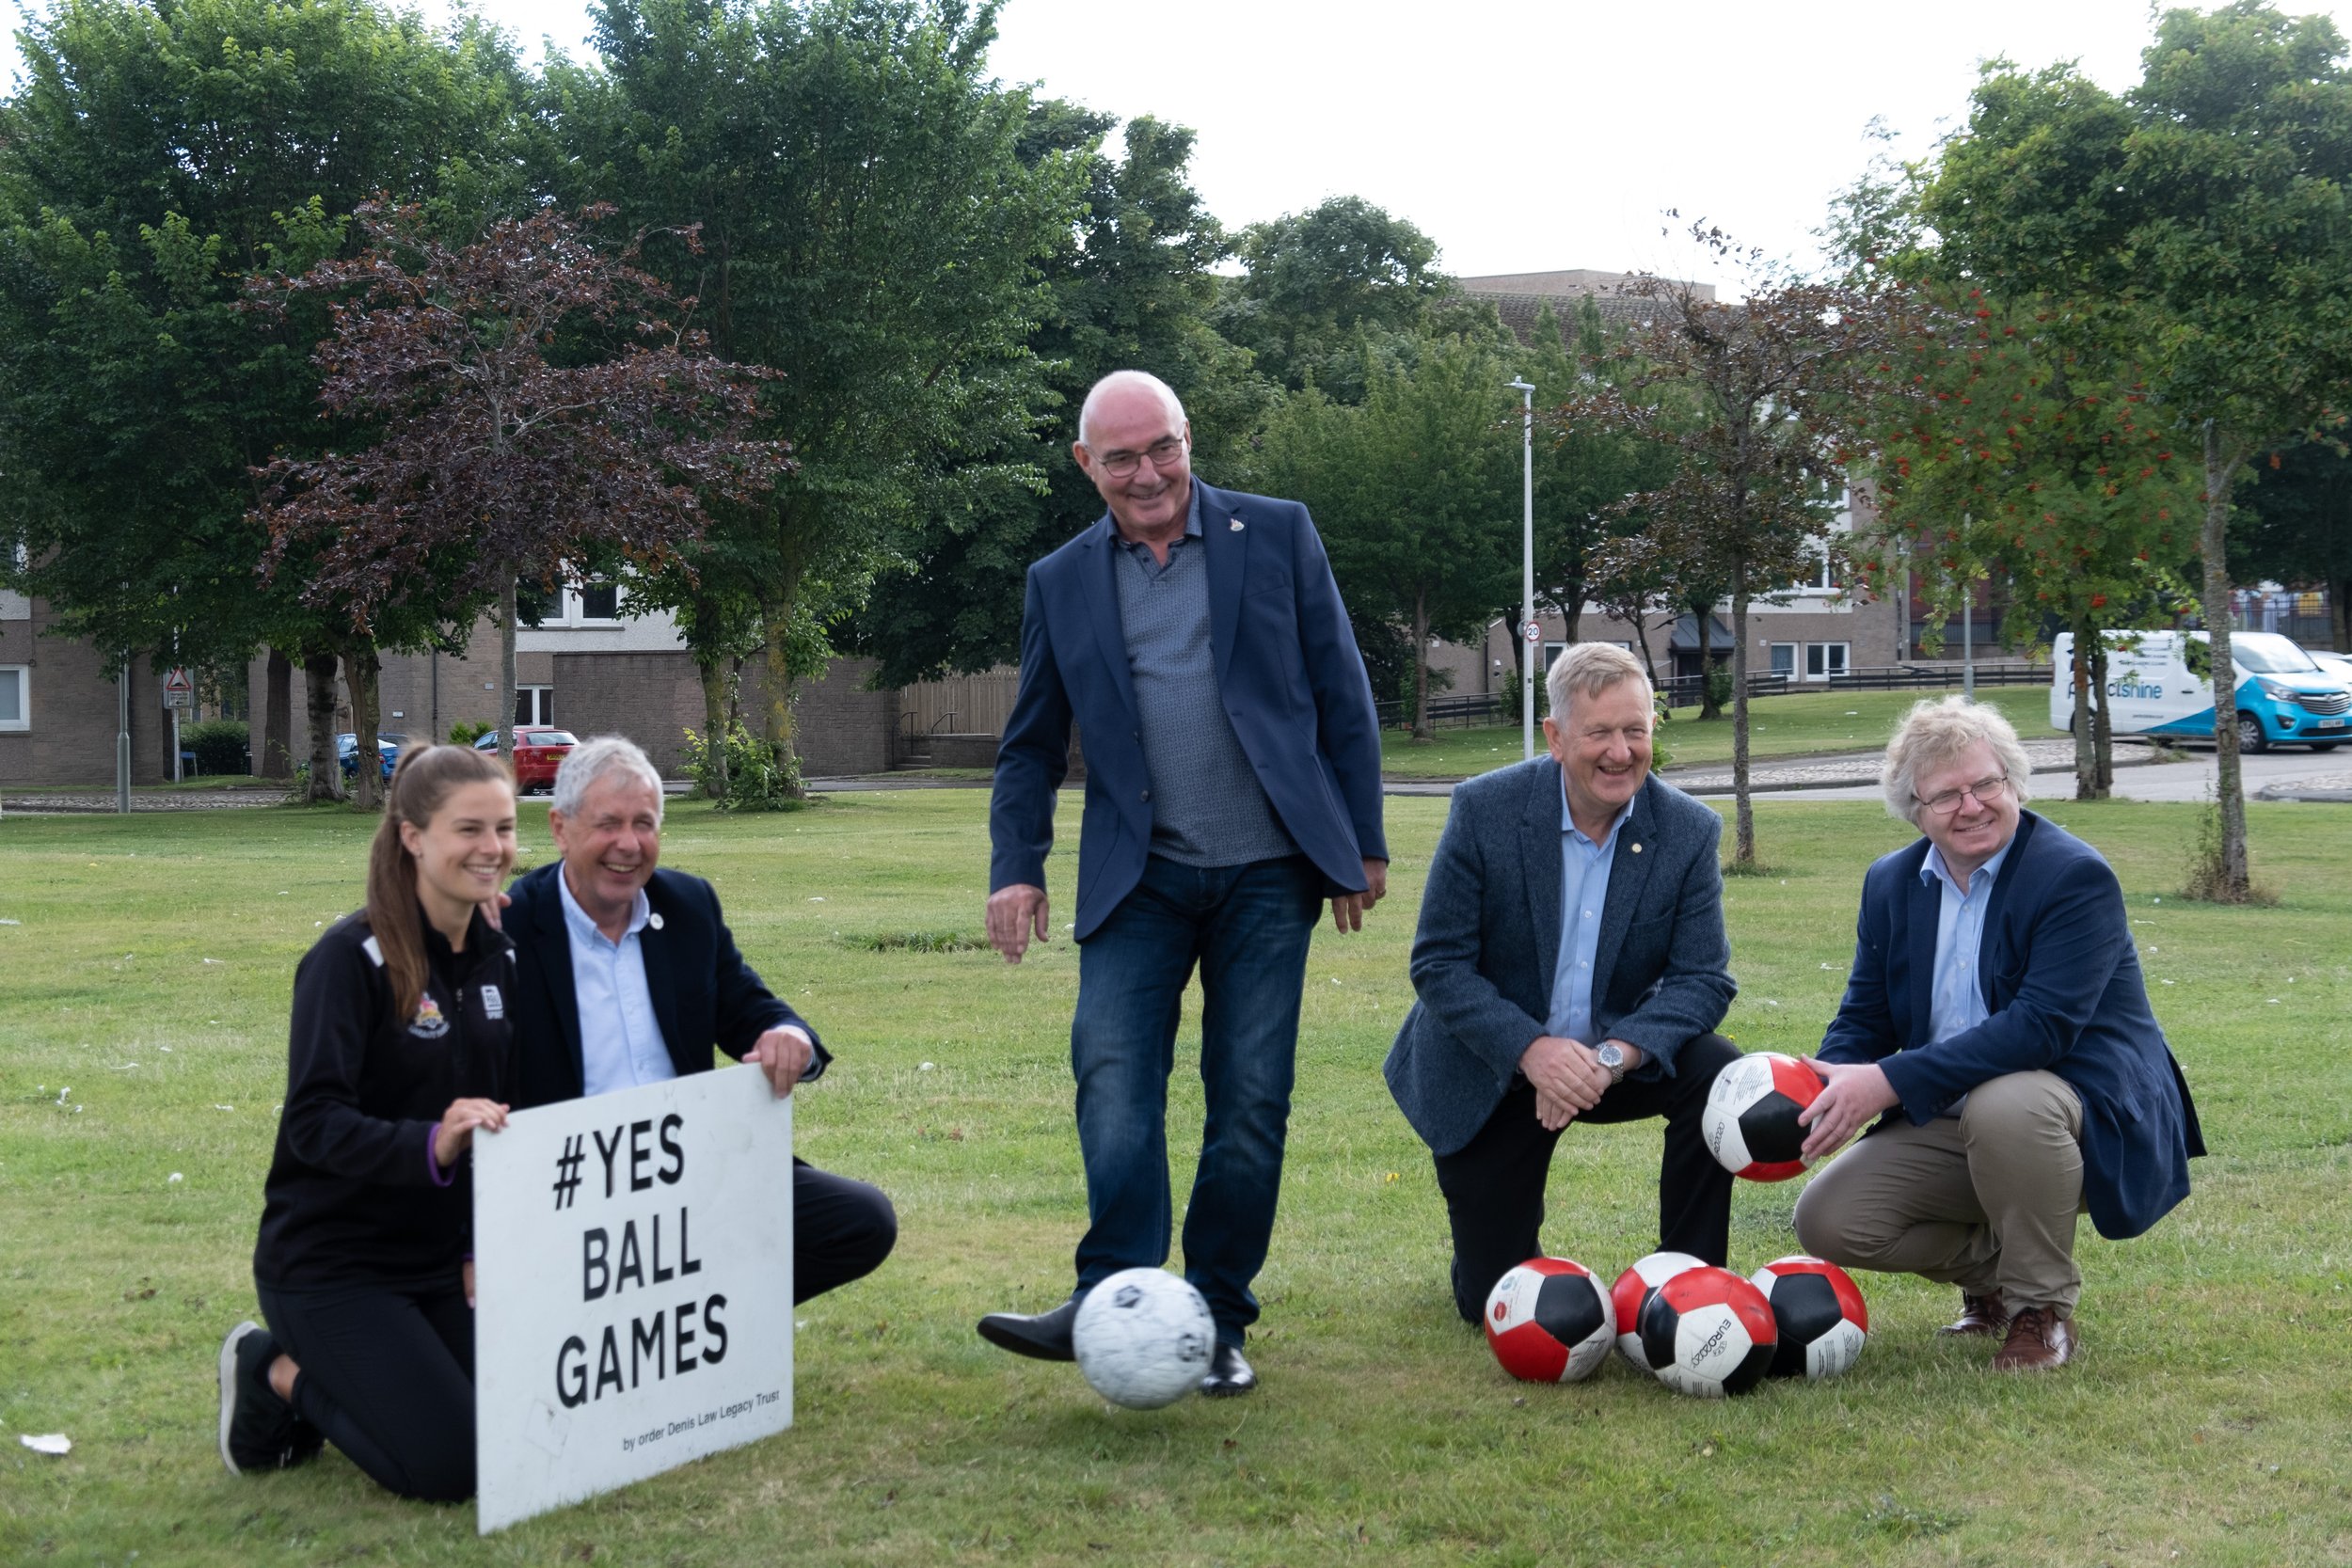 Kiana Coutts, Streetsport Outreach Officer, Denis Law Legacy Trust; David Suttie, Trustee, Denis Law Legacy Trust; Willie Miller; Alex Nicoll, ACC Co-Leader; Ian Yuill, ACC Co-Leader